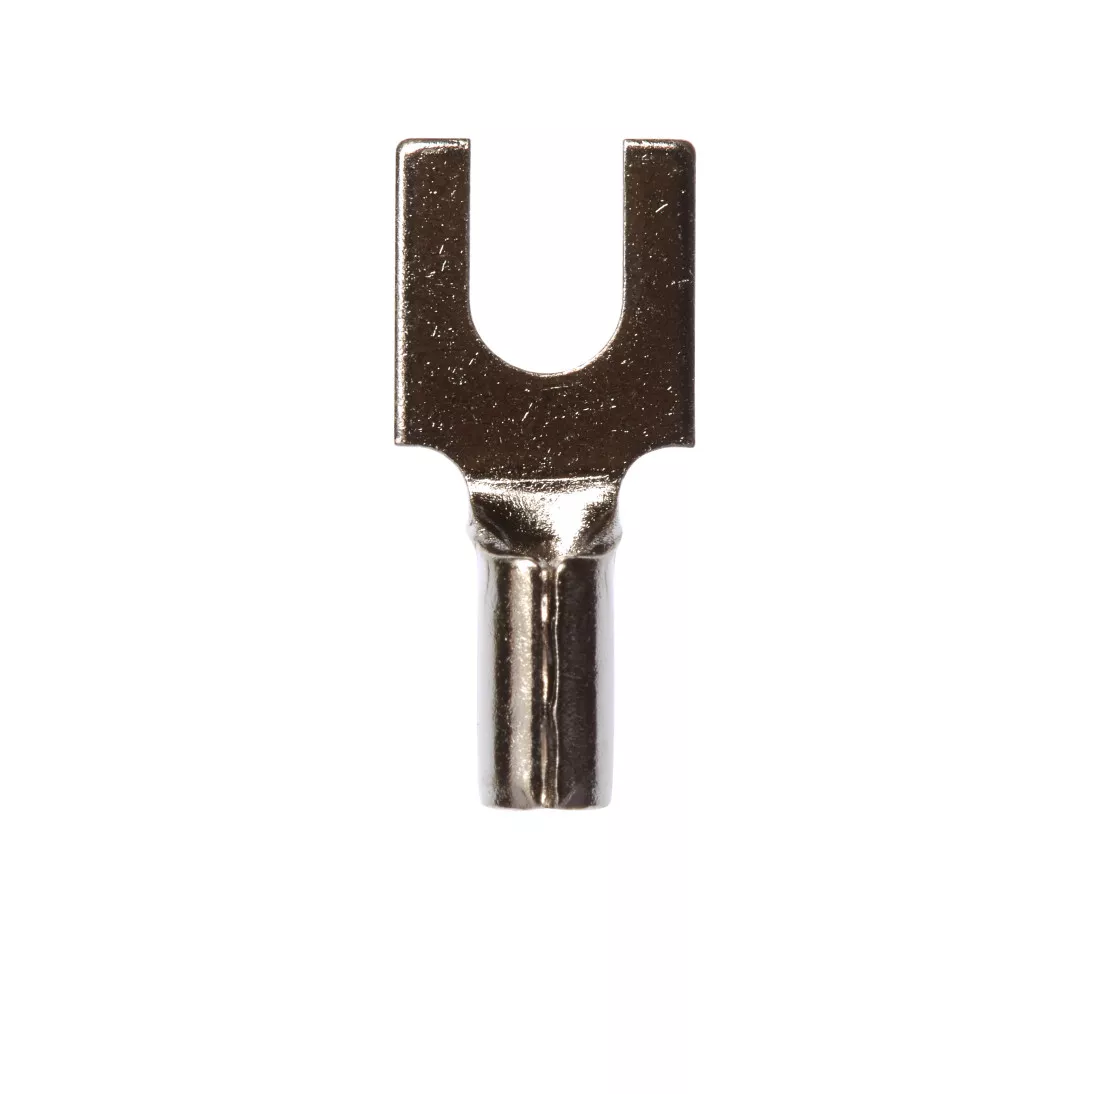 3M™ Scotchlok™ Block Fork, High Temperature Butted Seam MU18-6FBHTK,
22-18 AWG, suitable for use in a terminal block, 1000/Case